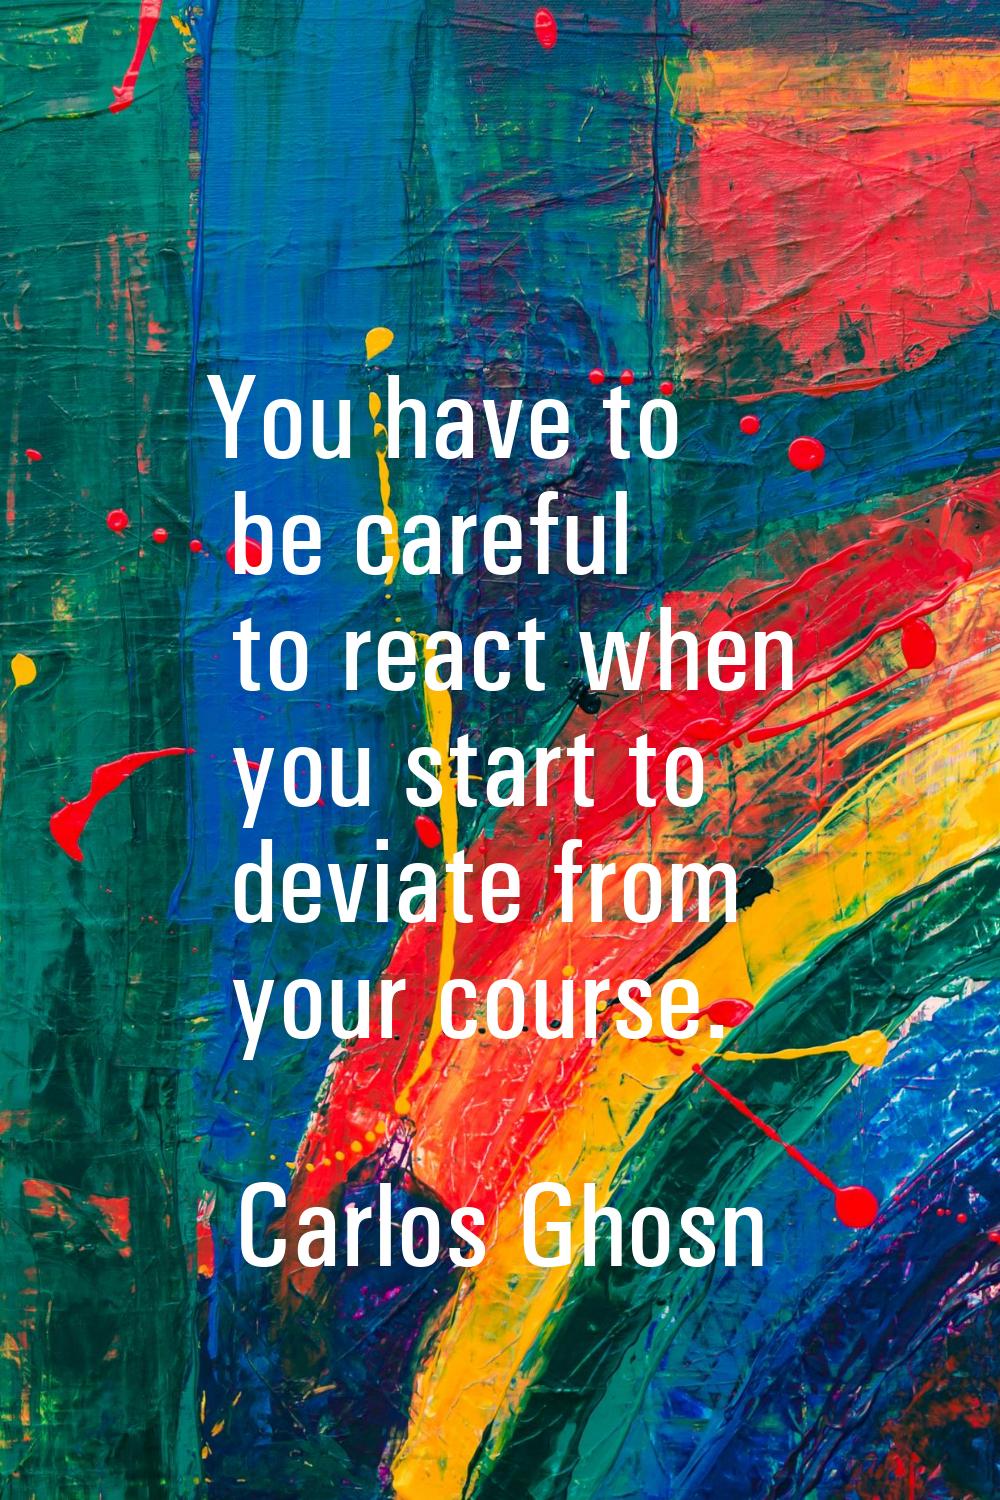 You have to be careful to react when you start to deviate from your course.